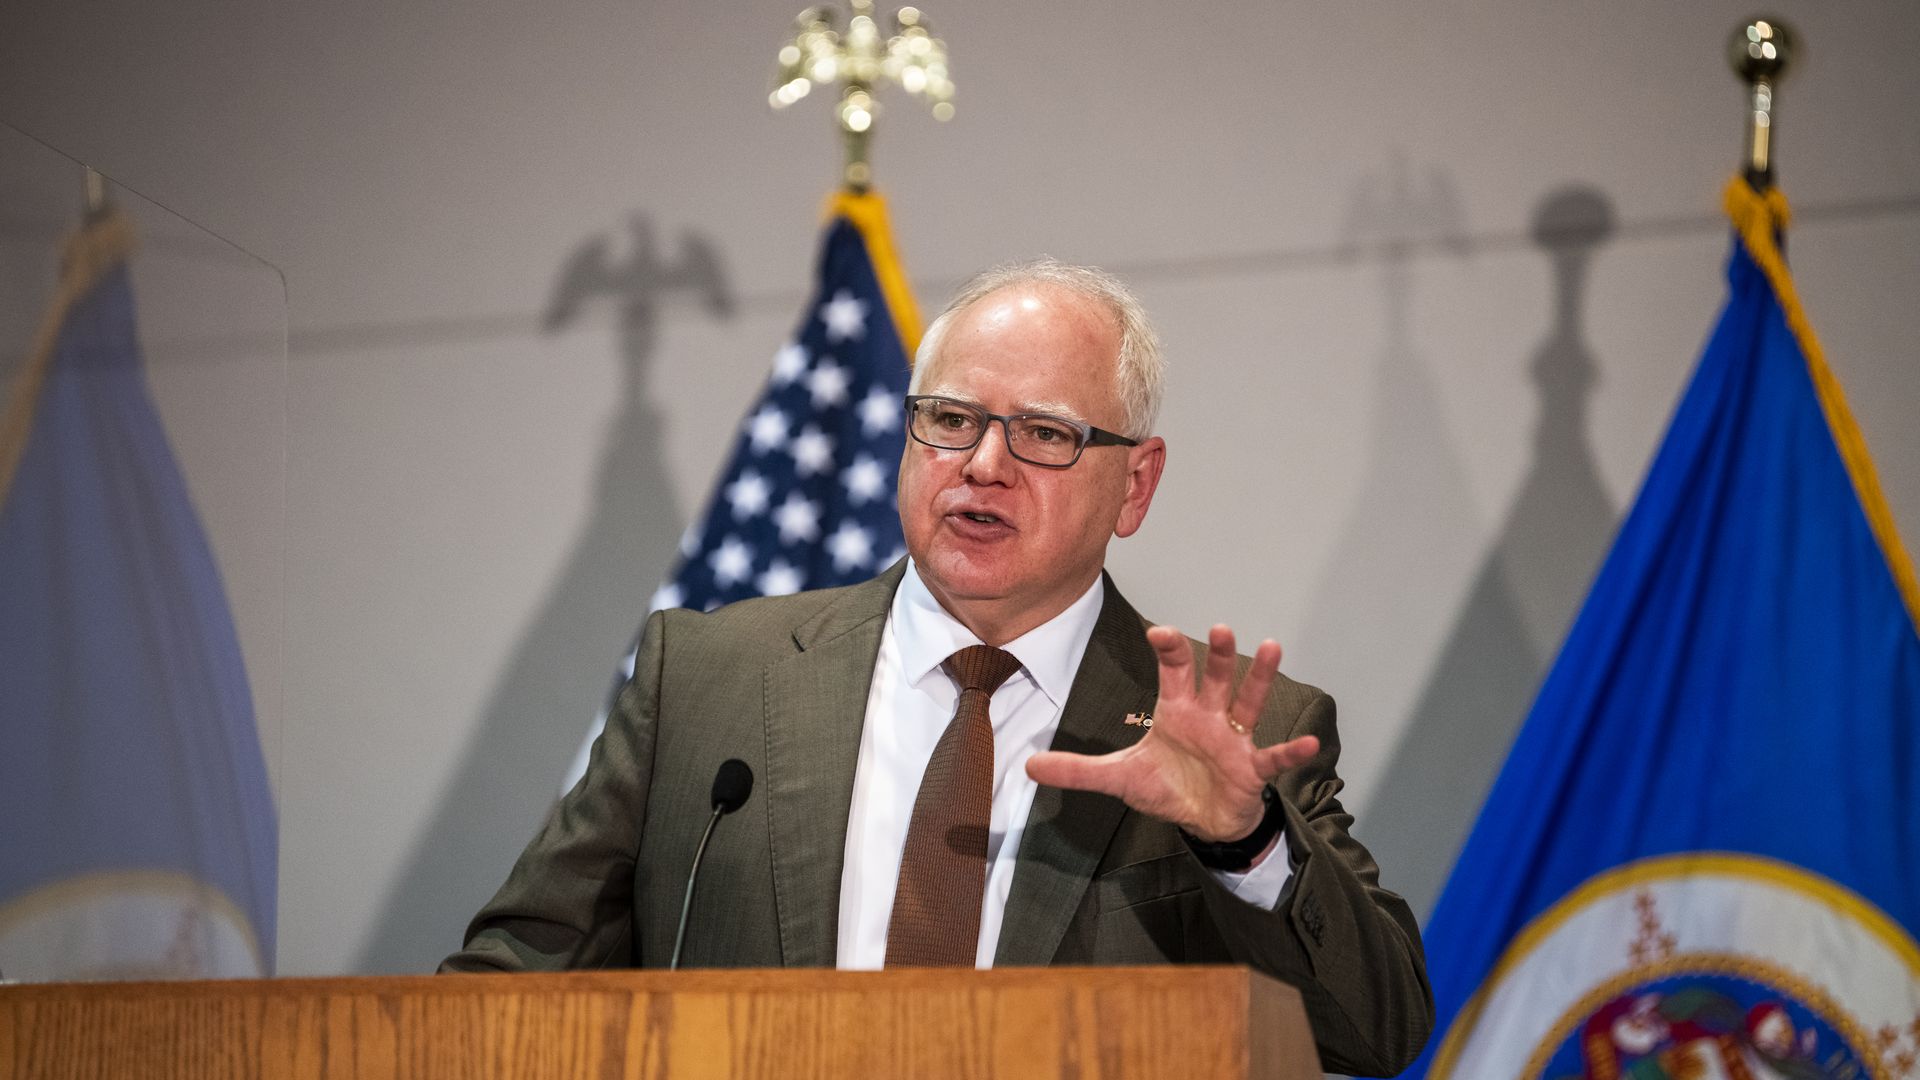 Minnesota Governor Tim Walz speaking in a press conference in April 2021.